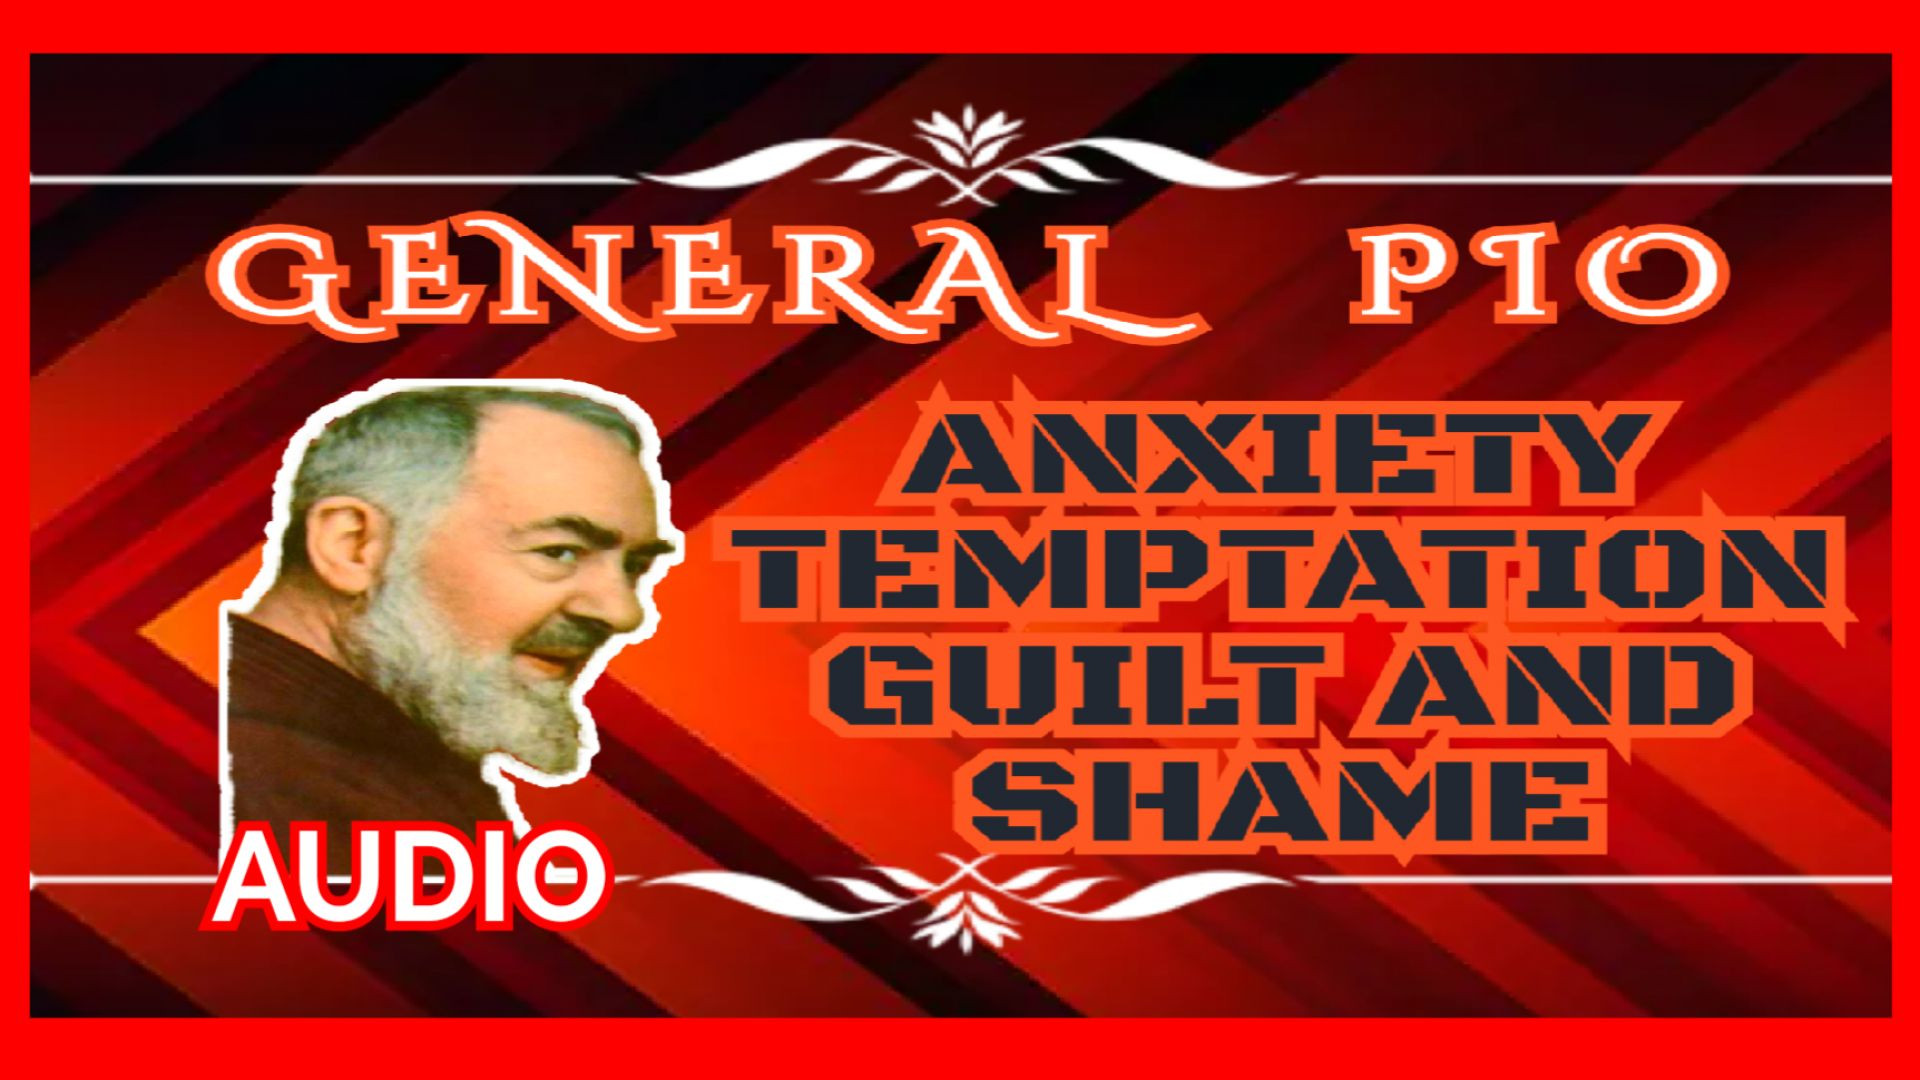 PADRE PIO ON ANXIETY TEMPTATION, GUILT AND SHAME - (audio)